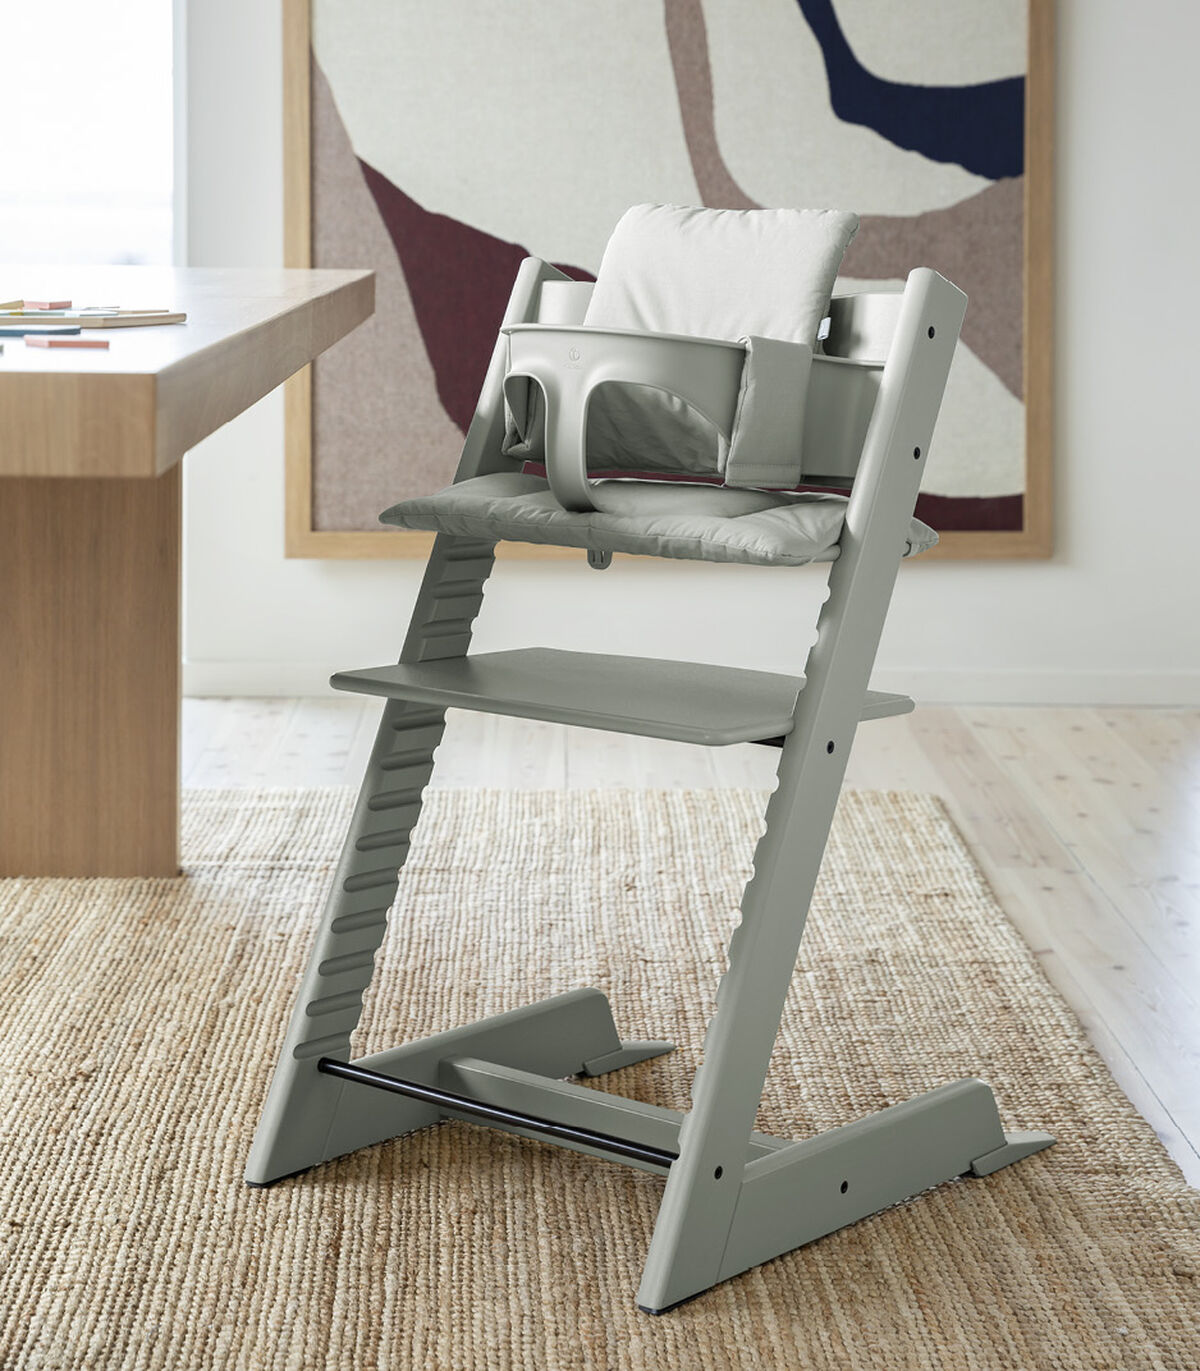 Stokke Tripp Trapp Newborn to Chair for Life Package